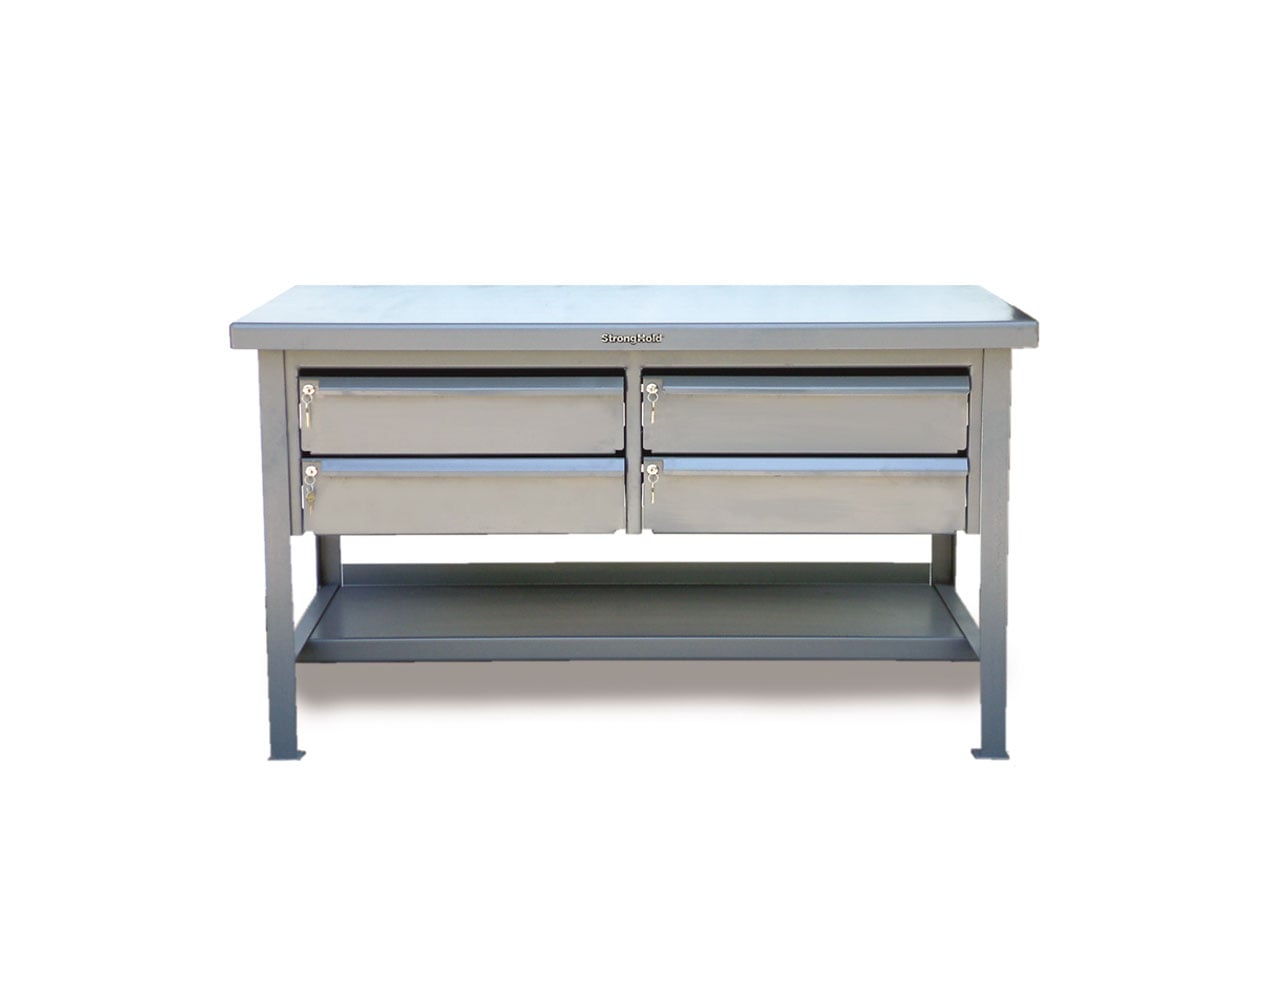 Extreme Duty 7 GA Shop Table with ABS Top, 4 Keylock Drawers, 1 Shelf - 48 In. W x 30 In. D x 34 In. H